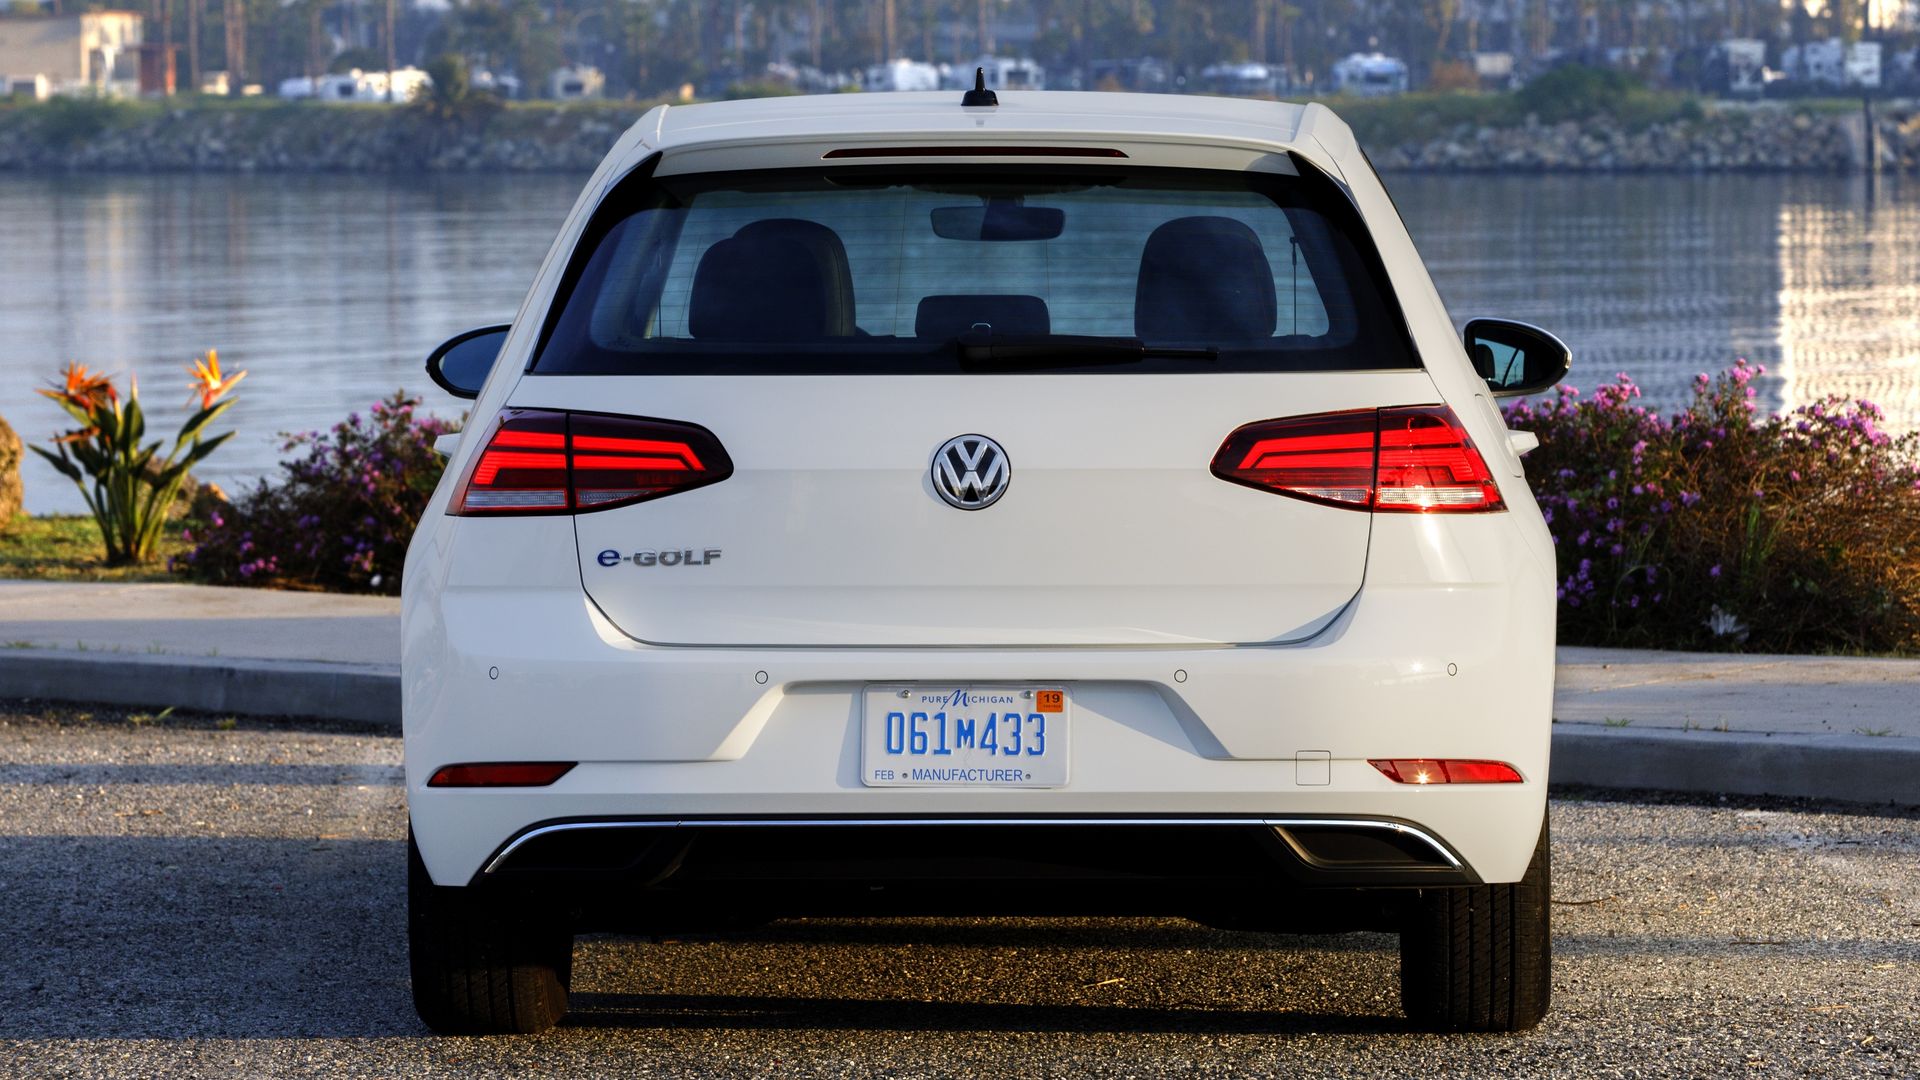 Image of the rear of a white Volkswagen e-Golf